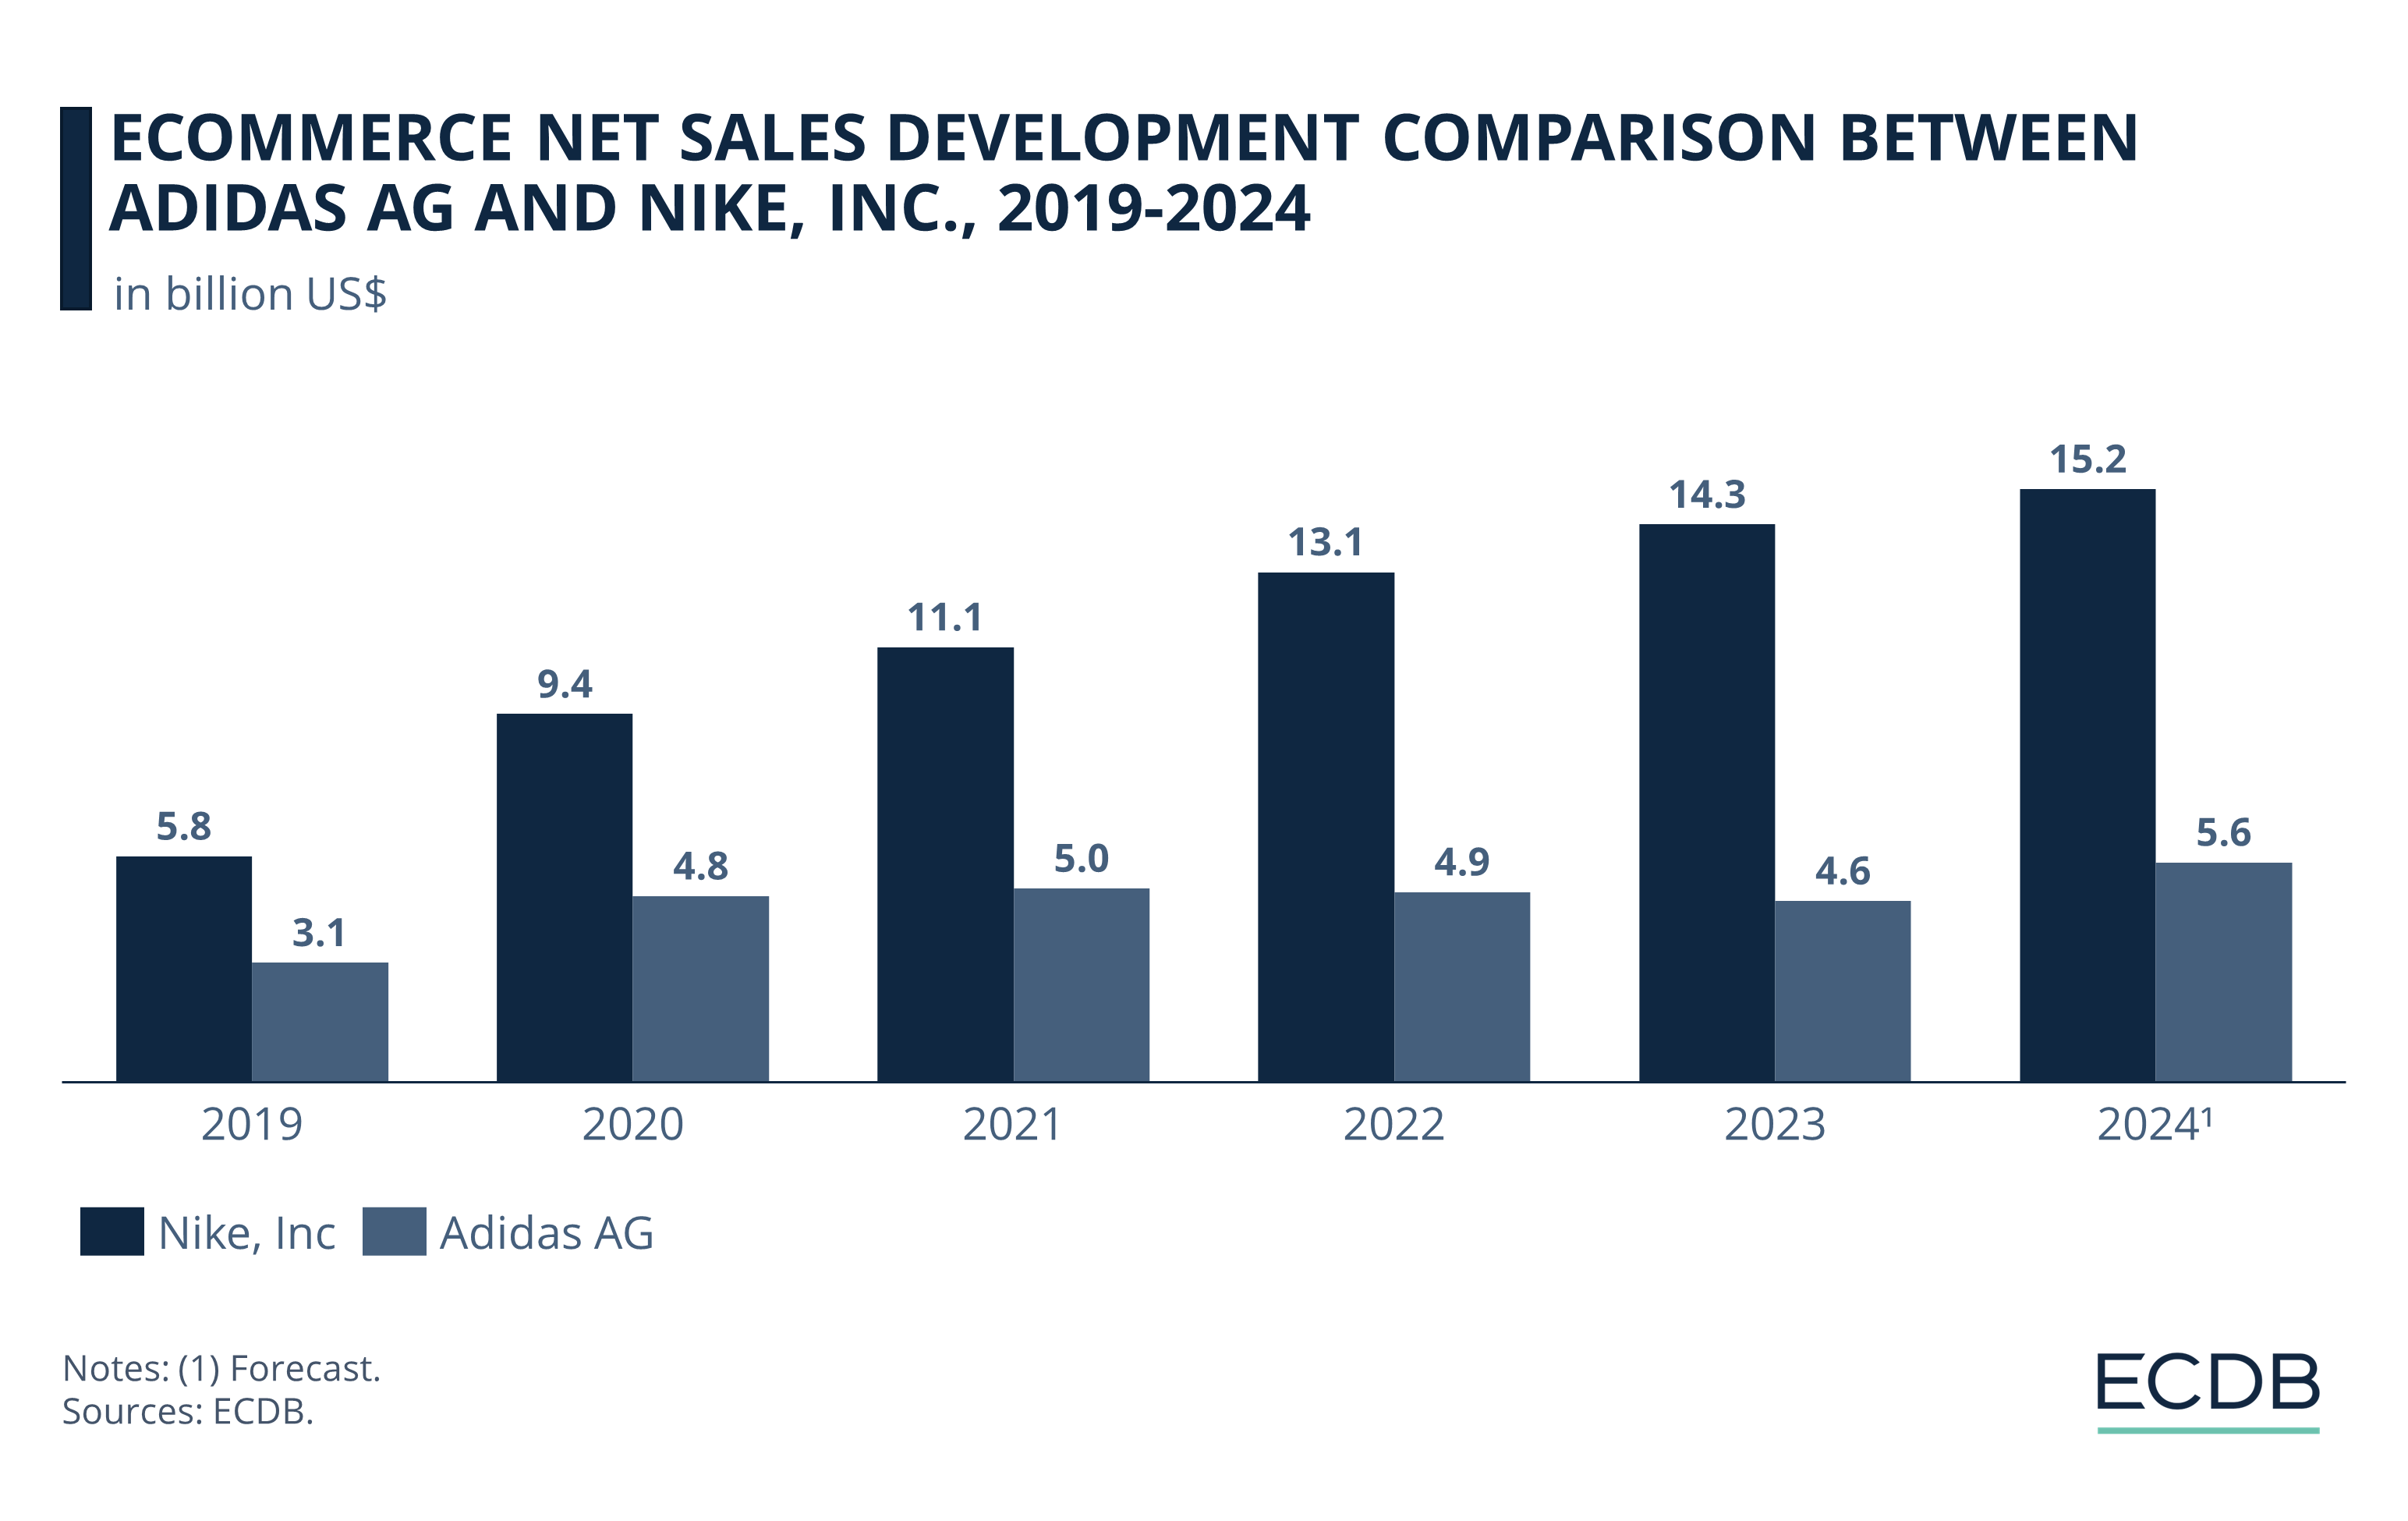 eCommerce Net Sales Development Comparison Between Nike, Inc and Adidas AG, 2019-2024